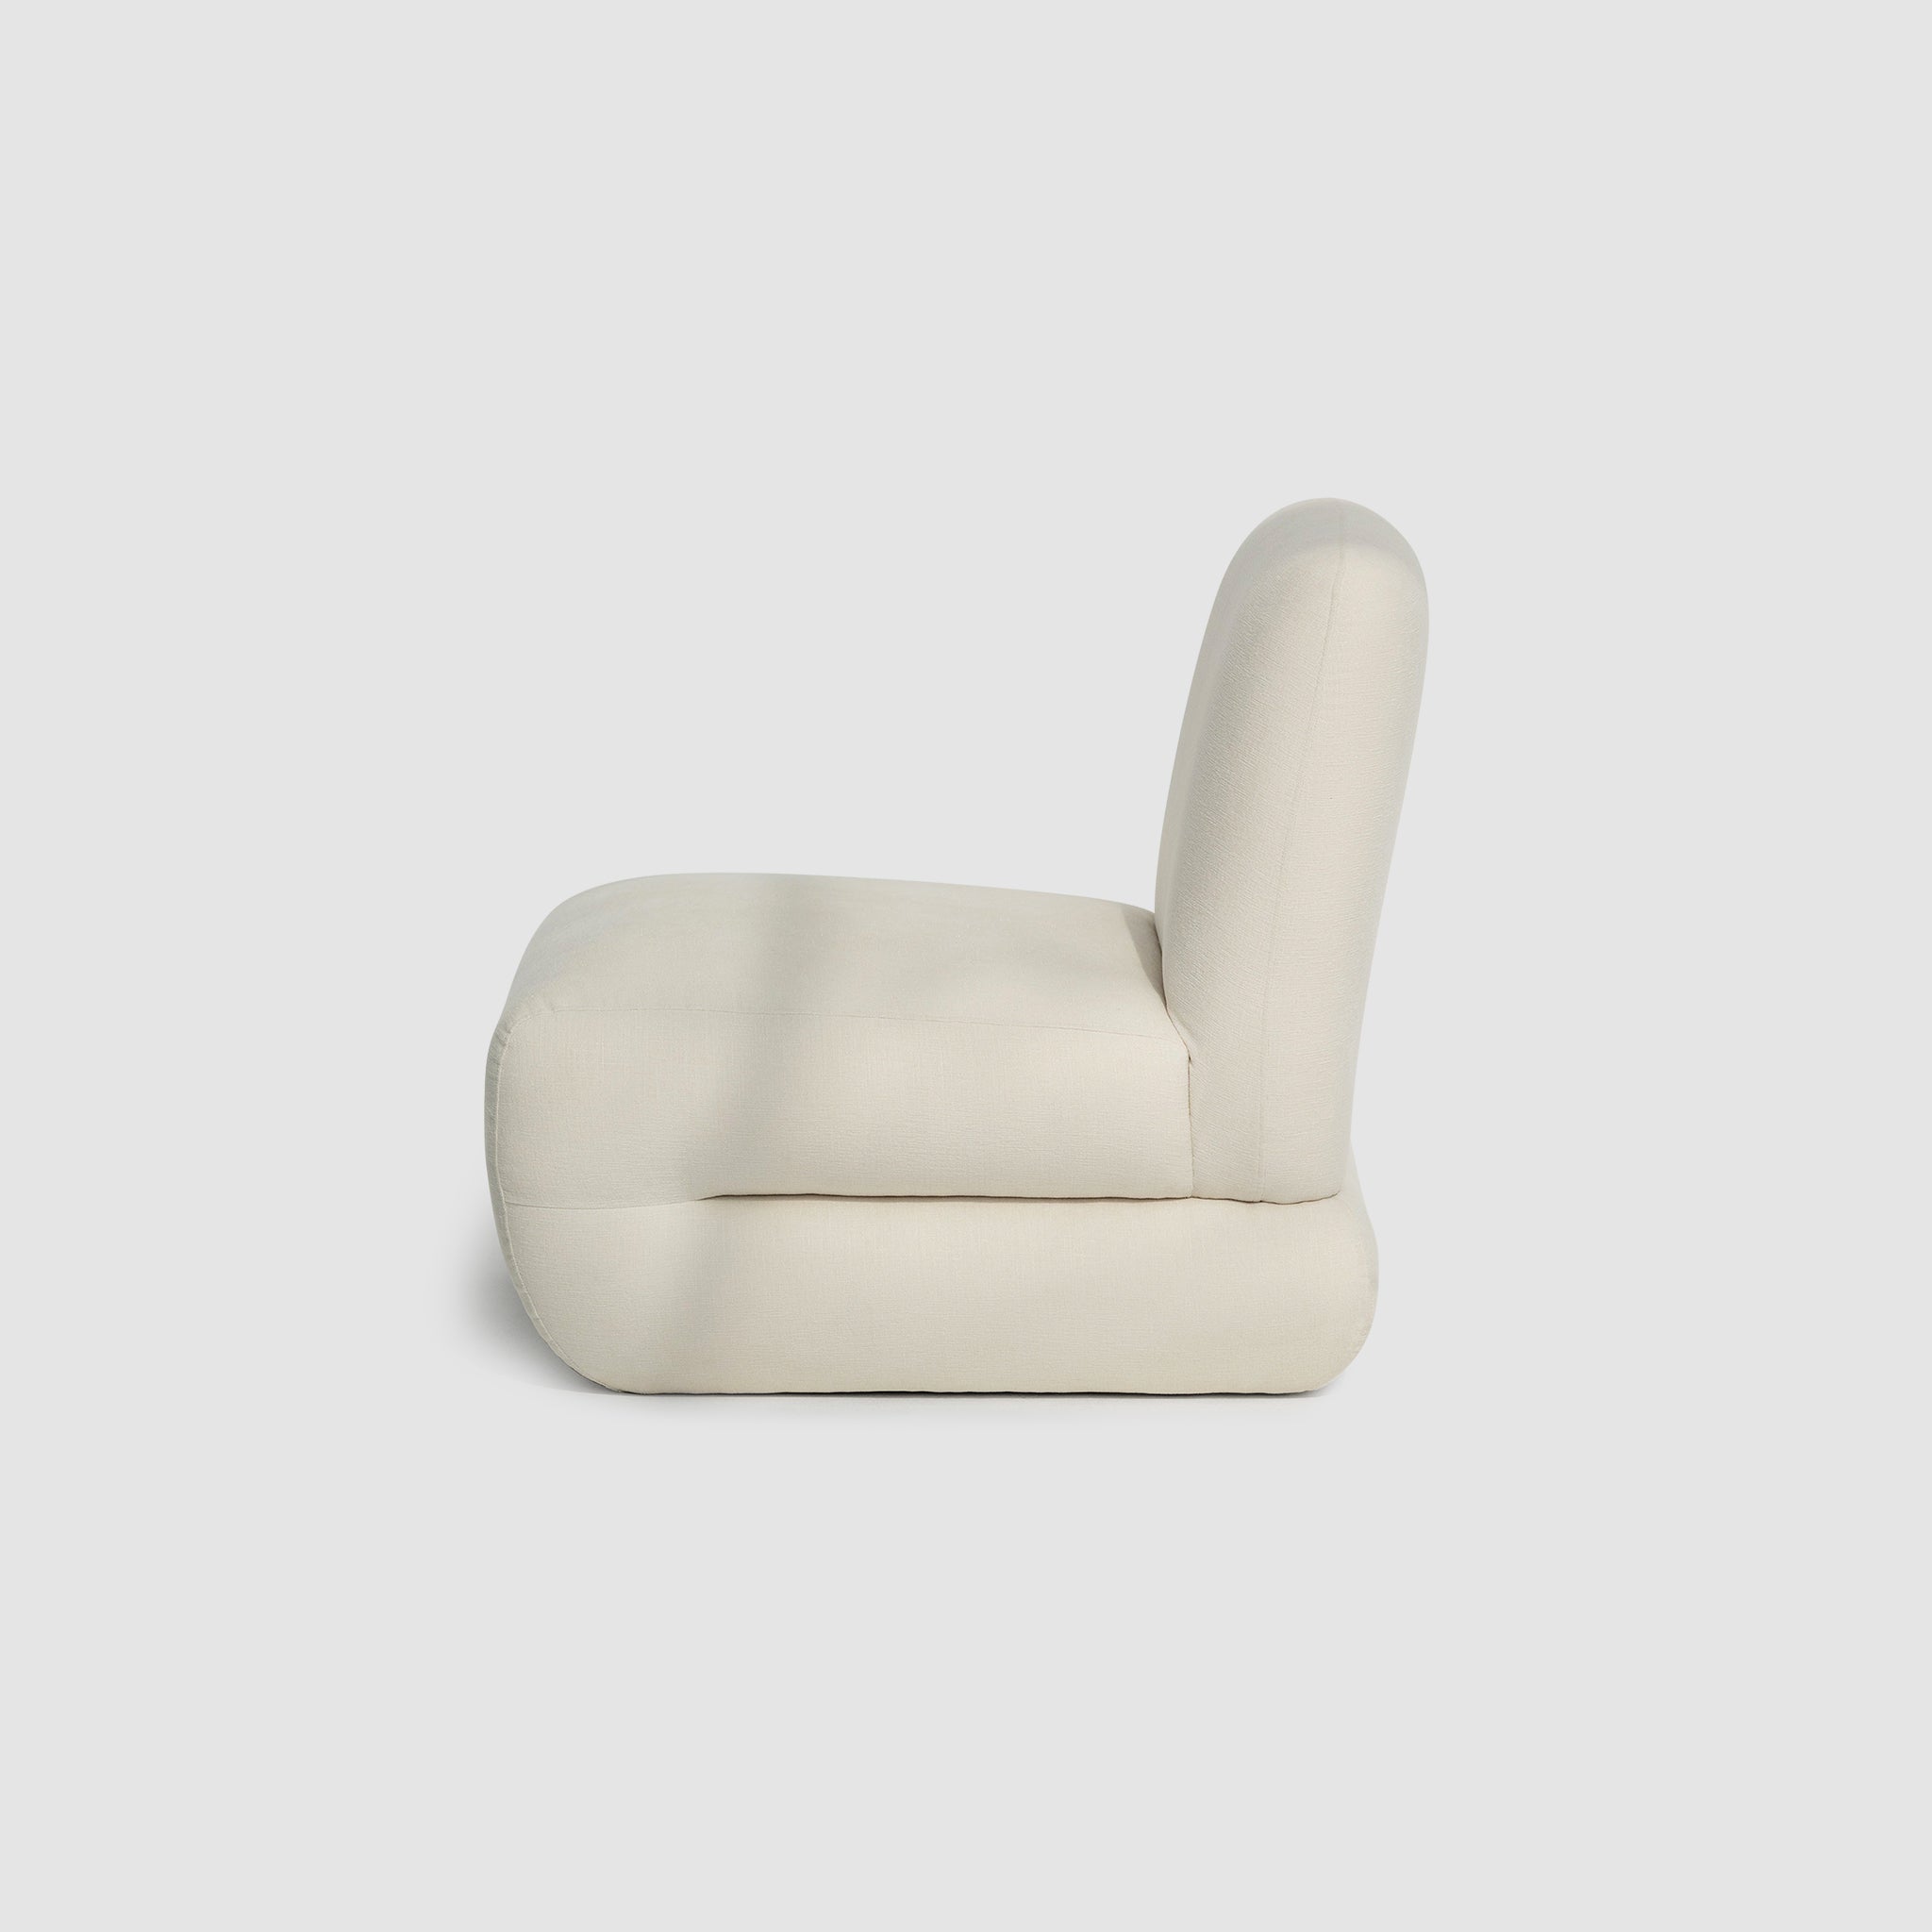 Side view of The Bopie Accent Chair in a soft, cream-colored fabric, highlighting its plush and modern design.